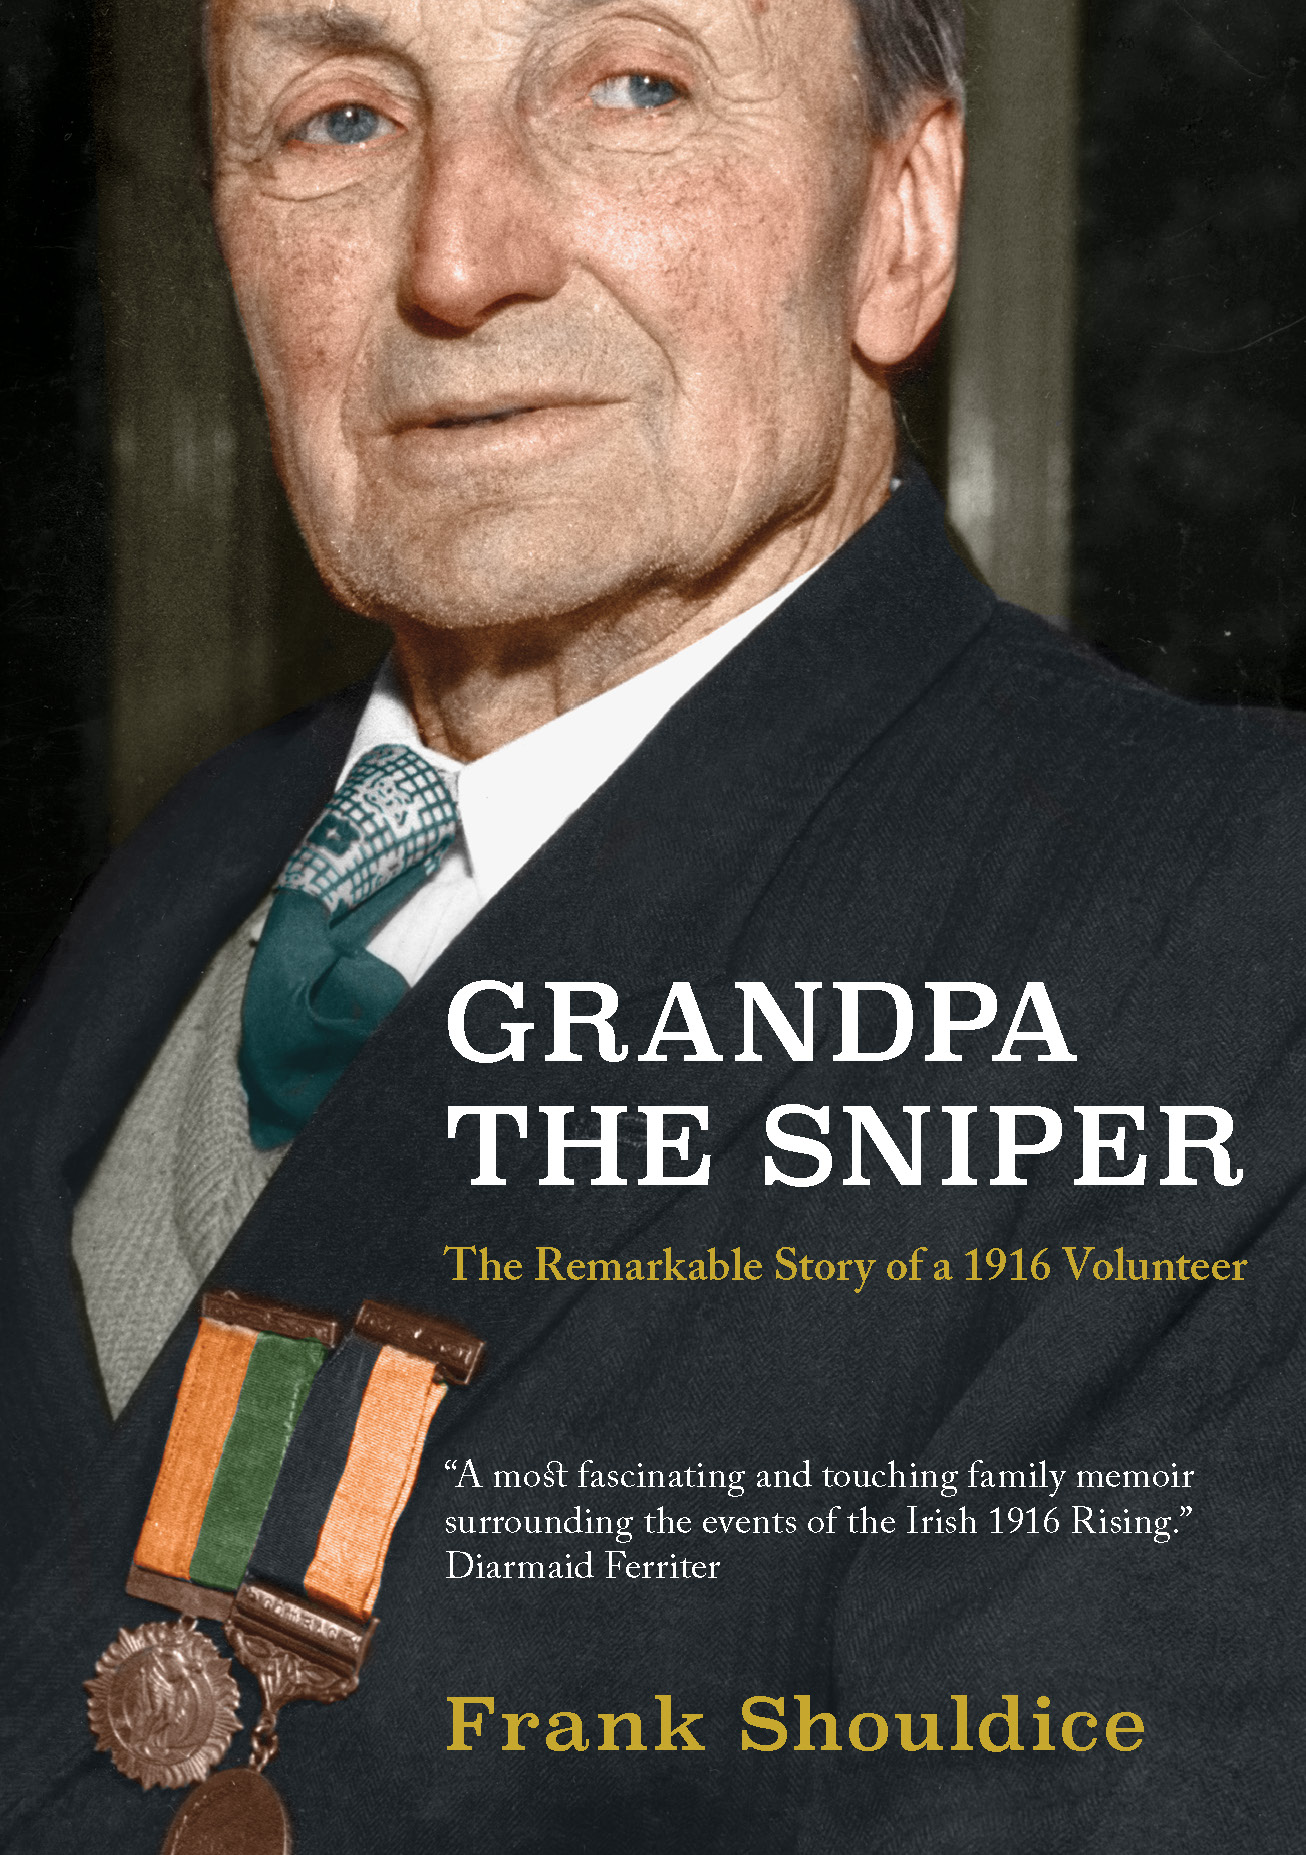 Grandpa The Sniper, published by  The Liffey Press,  is available in the  U.S. through  DuFour Editions at  irishbooks.us/rising1916,  priced at $28.